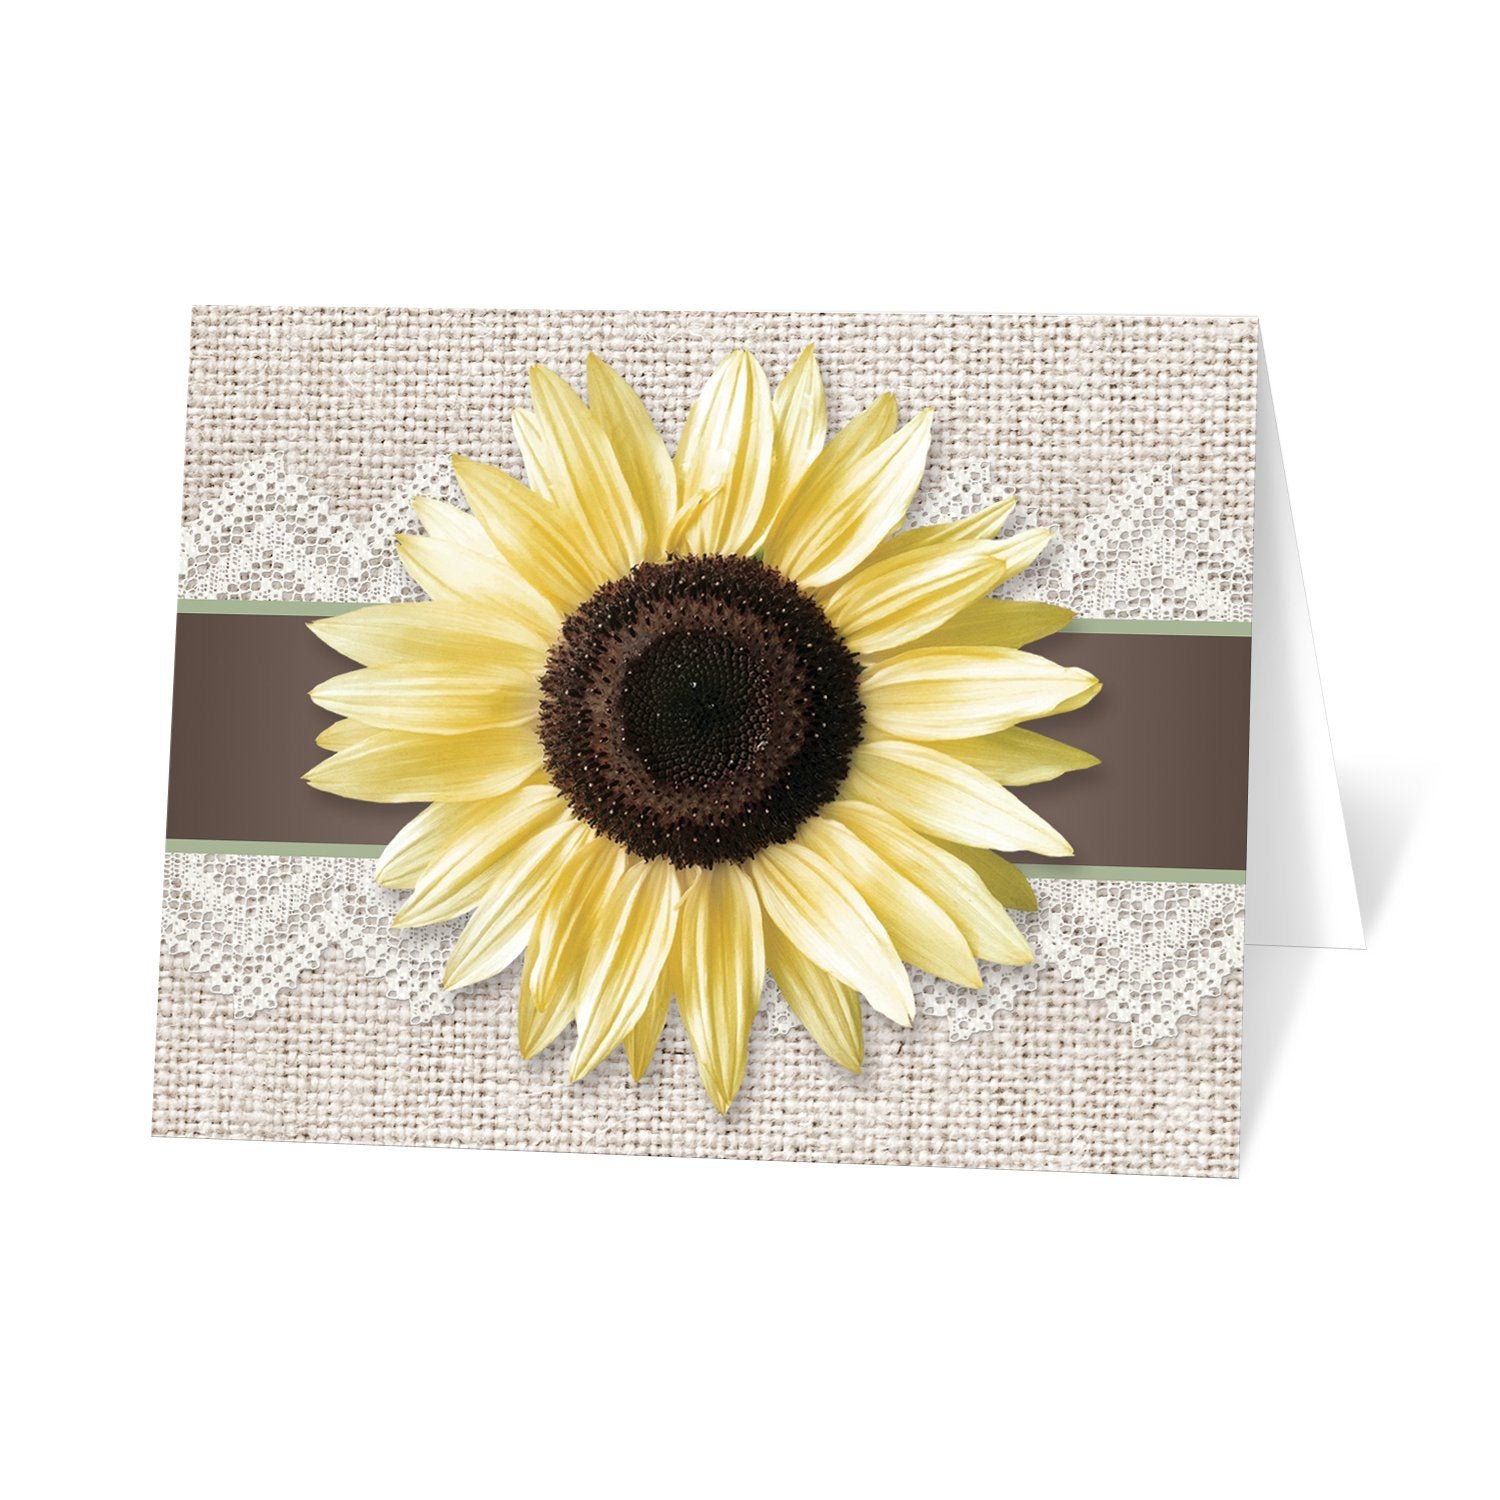 Burlap Lace Brown Sage Sunflower Note Cards at Artistically Invited